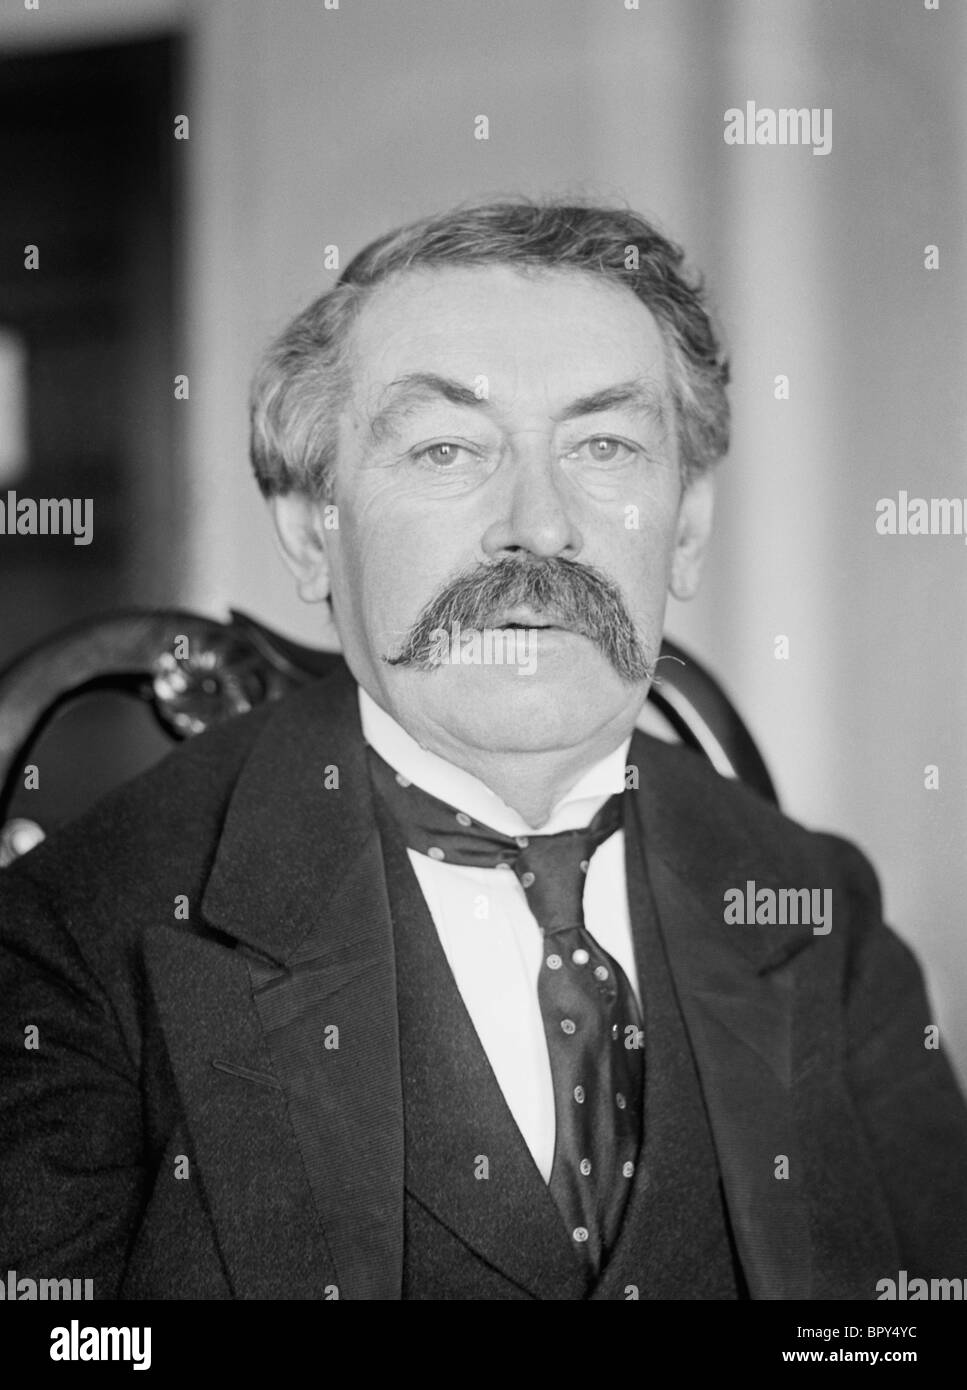 Portrait photo c1921 of Aristide Briand (1862 - 1932) - Prime Minister of France on several occasions between 1909 + 1929. Stock Photo